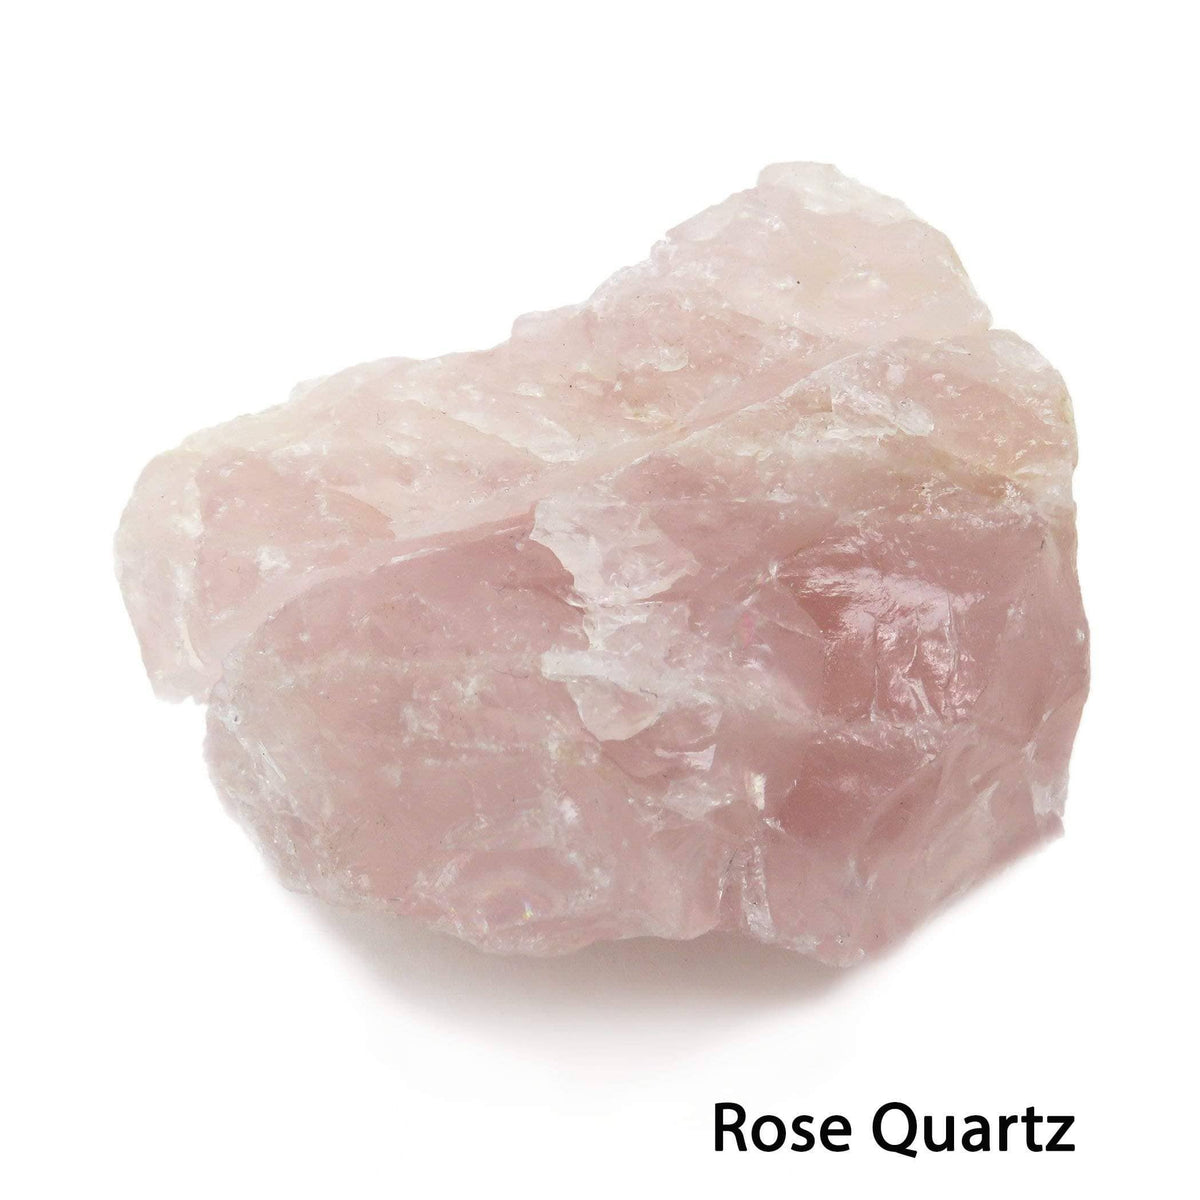 Natural Rose Quartz Stone Place Card Holder - Small Picture Stand